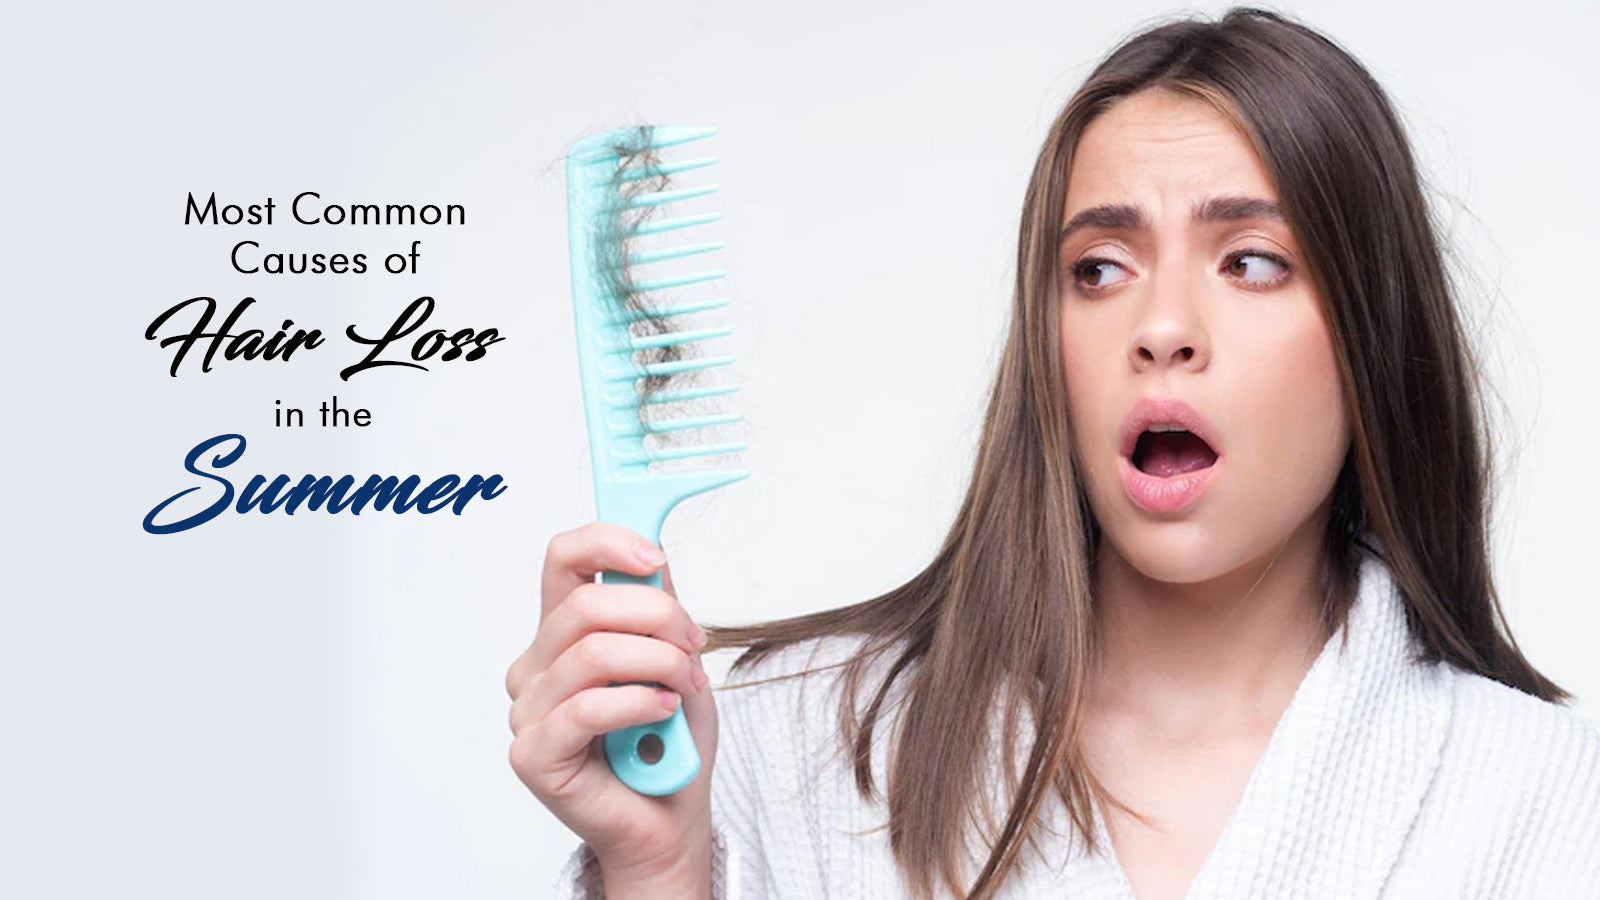 Most Common Causes of Hair Loss in the Summer